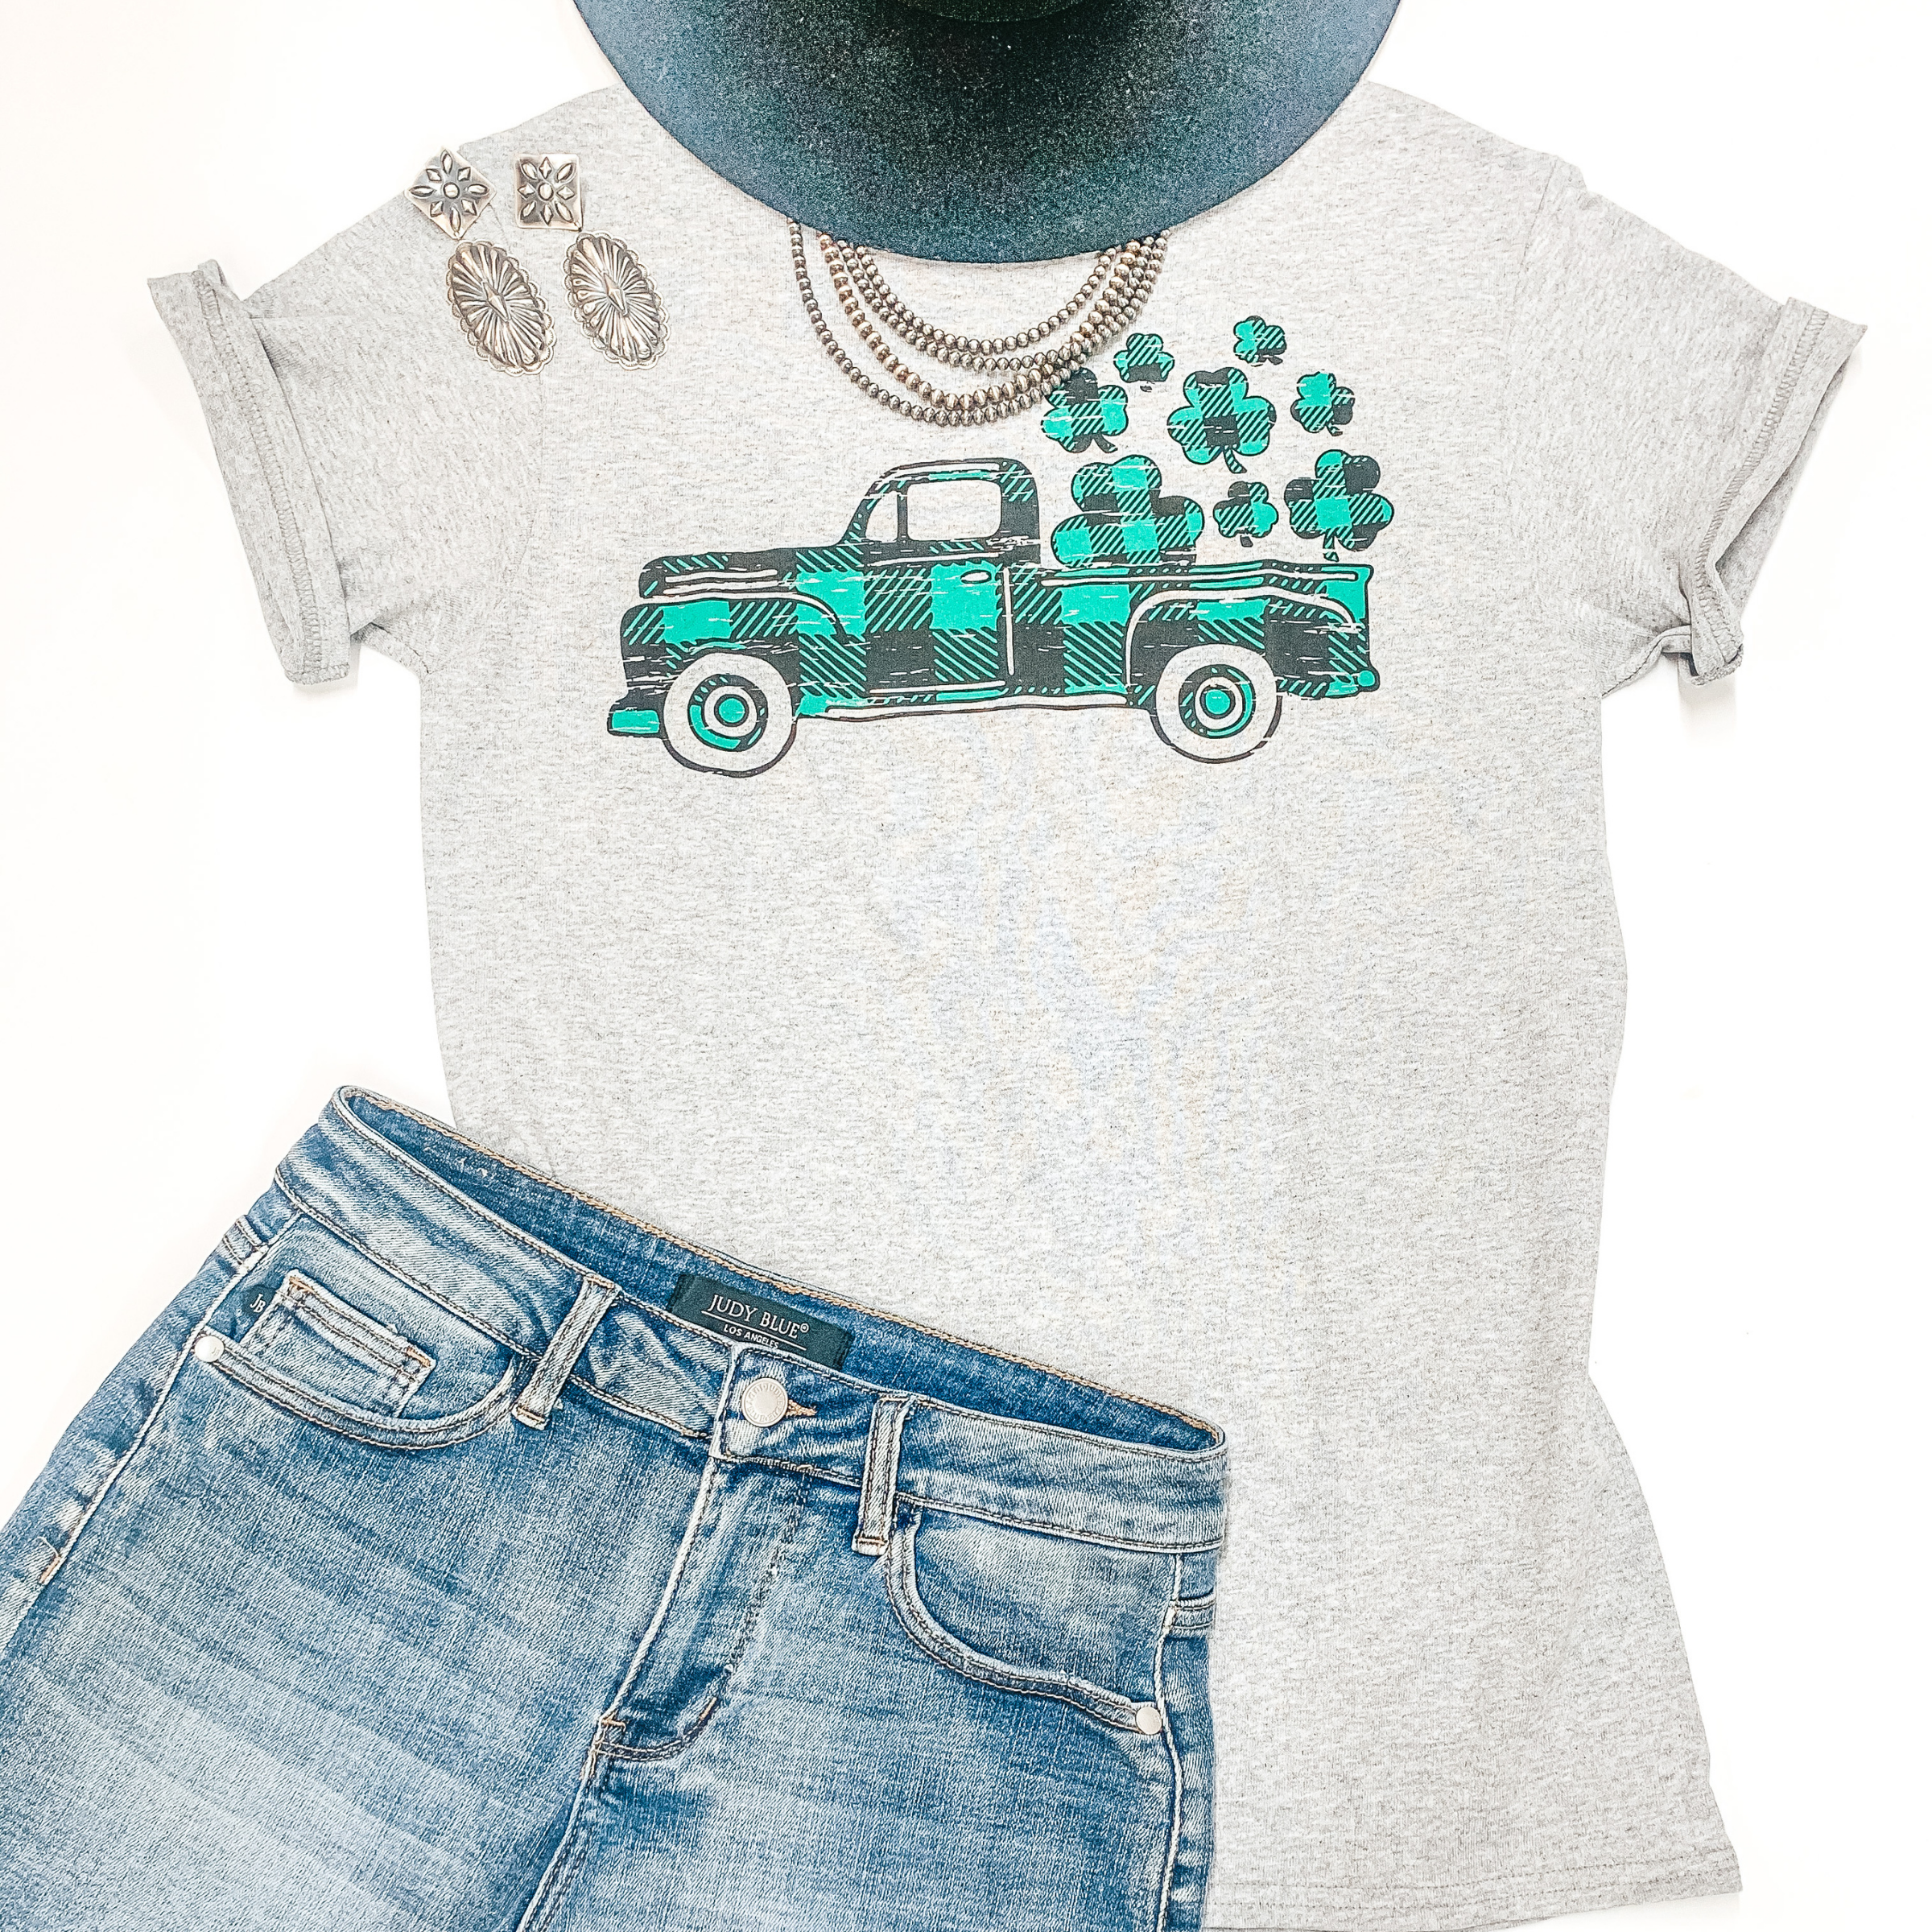 Take My Luck For A Ride Buffalo Plaid Pickup Truck with Clovers Graphic Tee in Heather Grey - Giddy Up Glamour Boutique